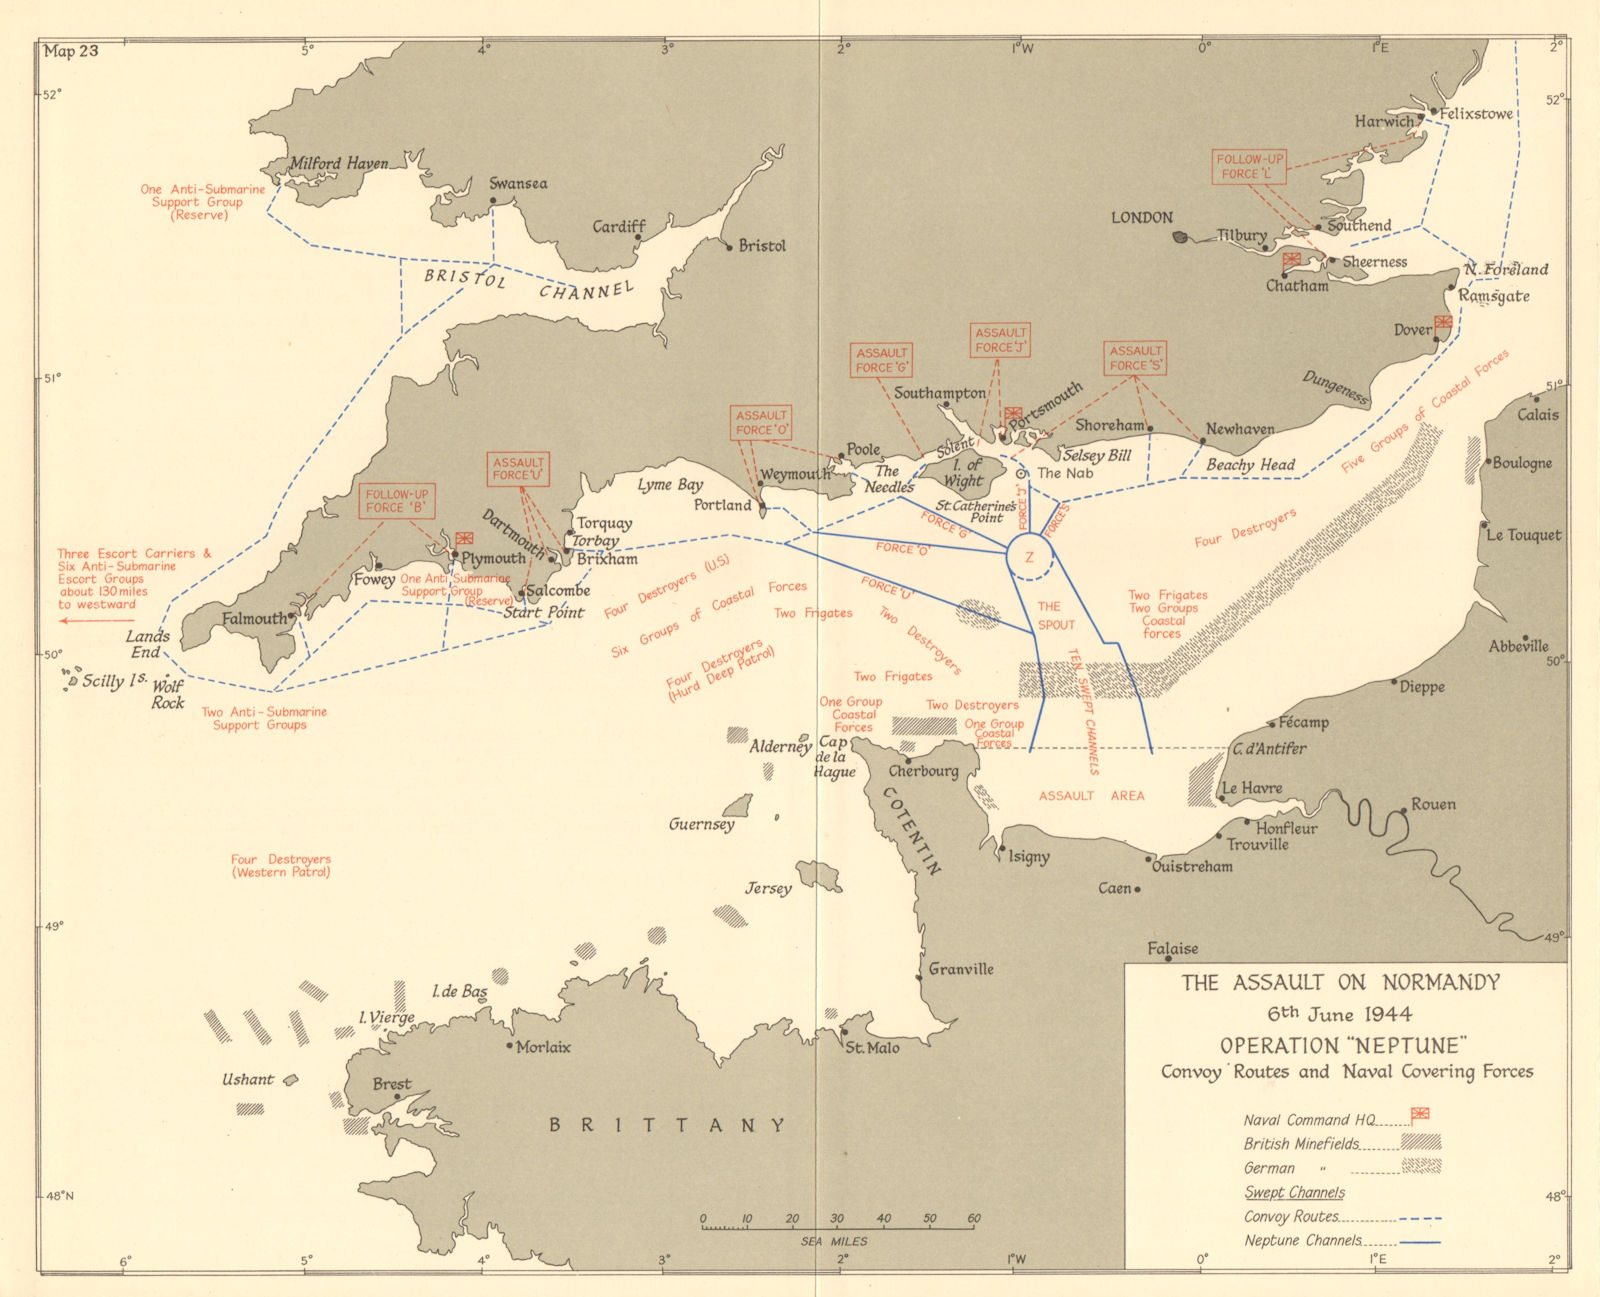 D-Day Operation Neptune 6 June 1944 Convoy routes Naval covering forces 1961 map